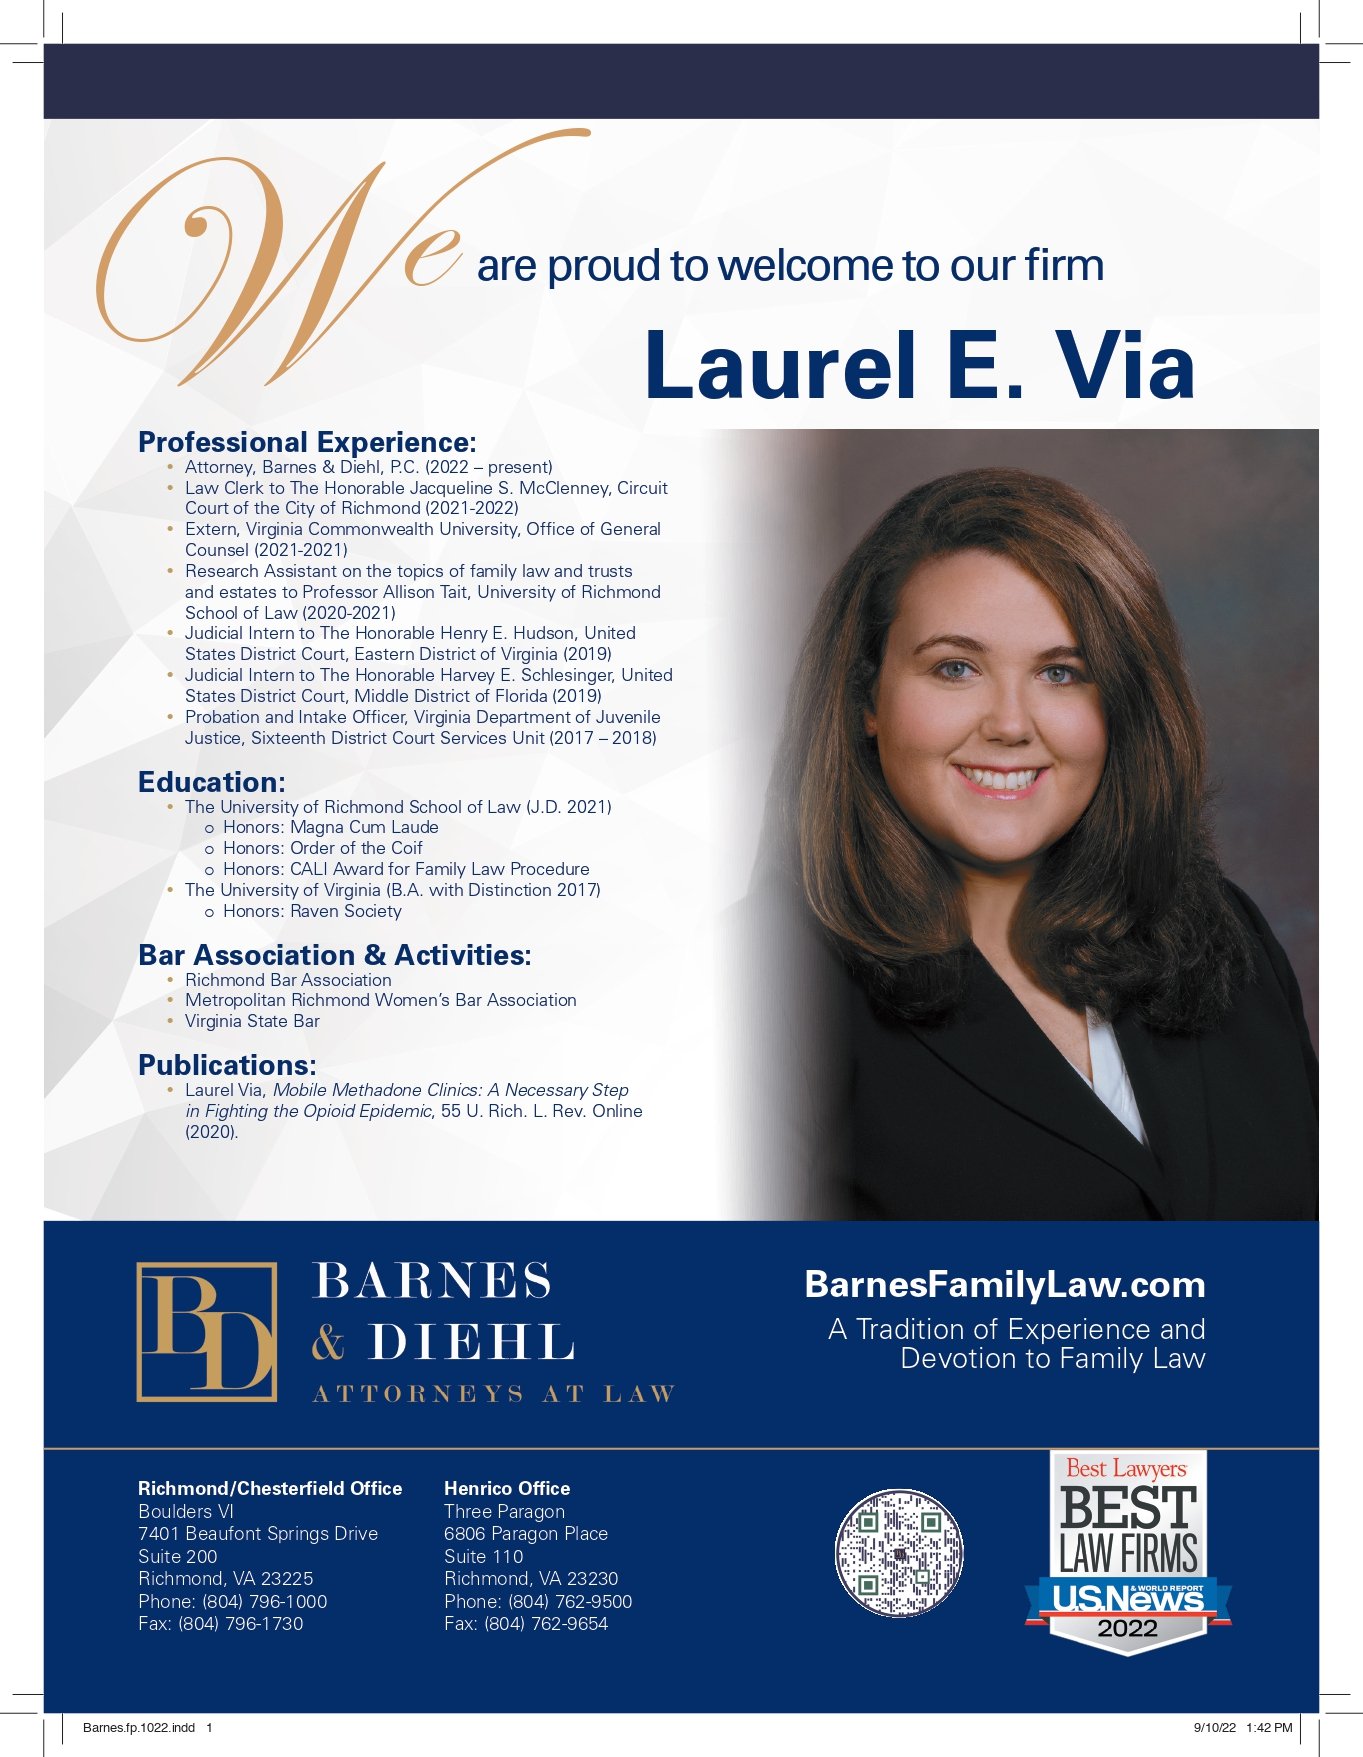 We are proud to welcome to our firm Laurel E. Via